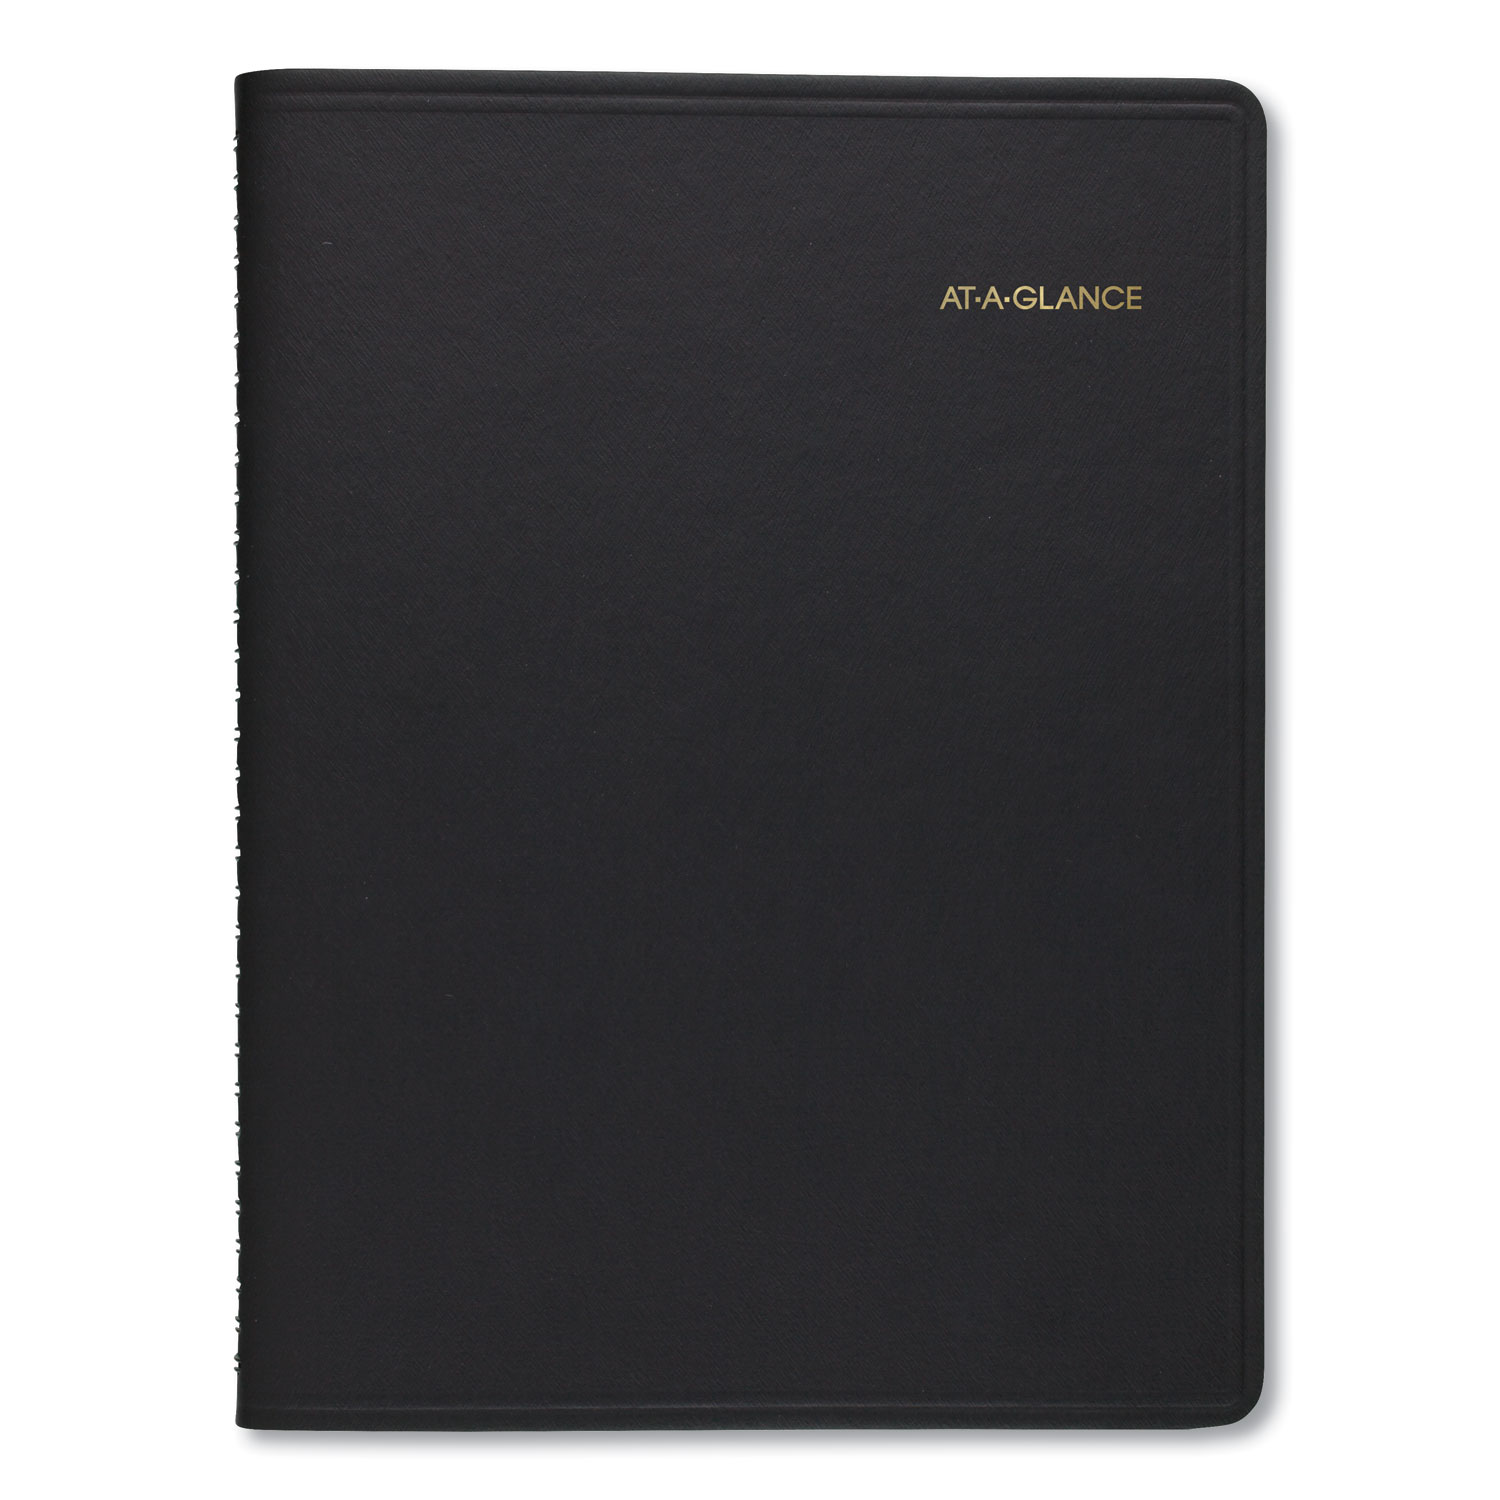  AT-A-GLANCE 7086505 Weekly Appointment Book Ruled, Hourly Appts, 8 3/4 x 6 7/8, Black, 2020-2021 (AAG7086505) 